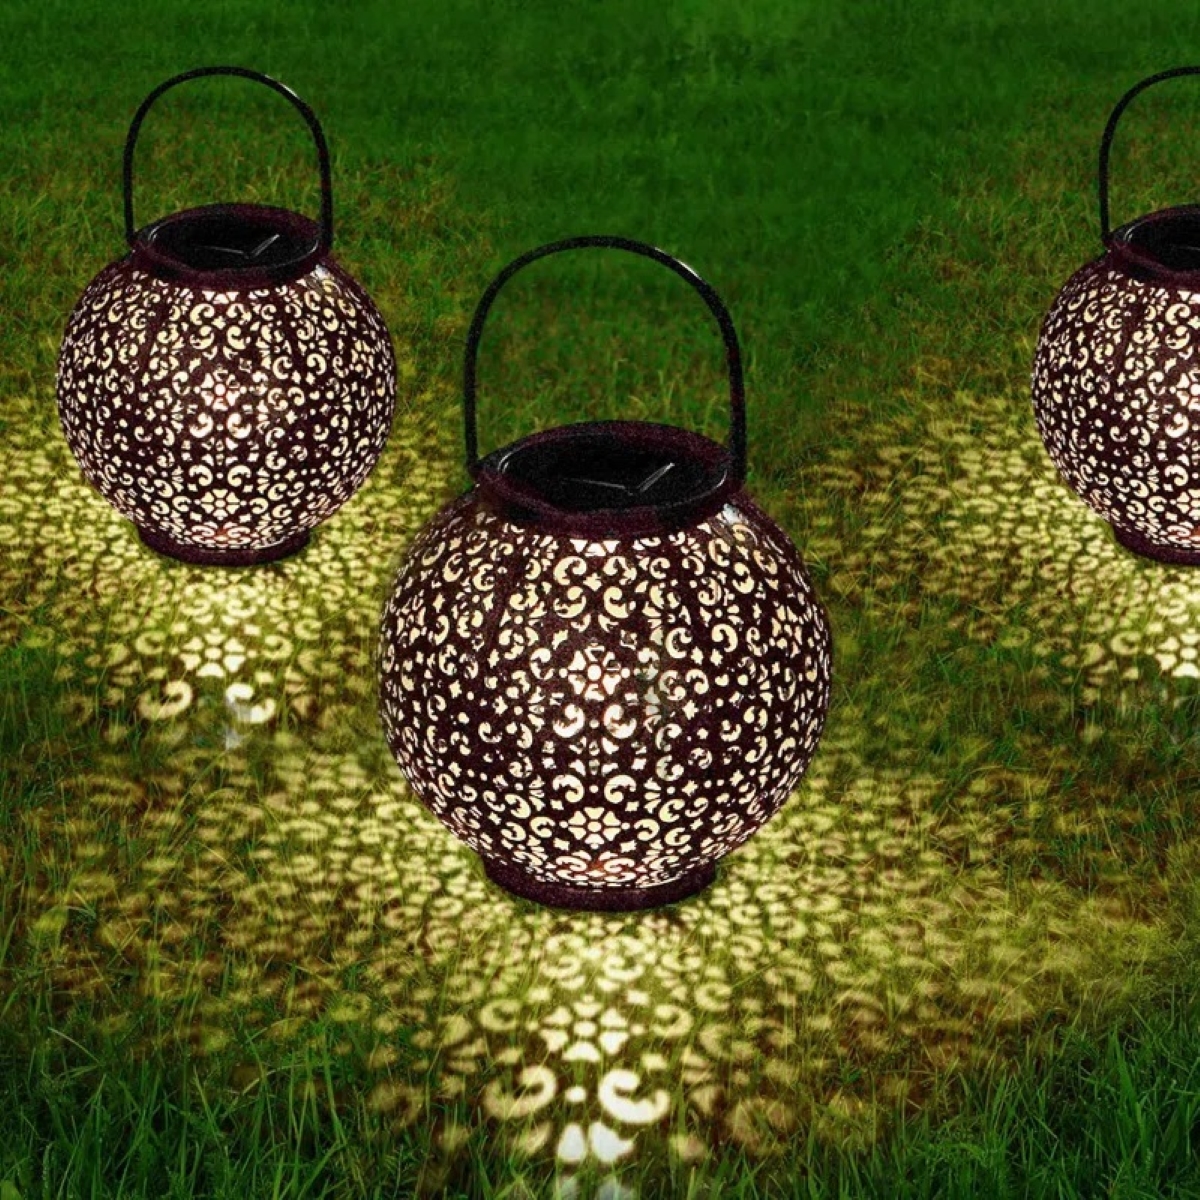 decor with candles - decorative globe candle holders on grass